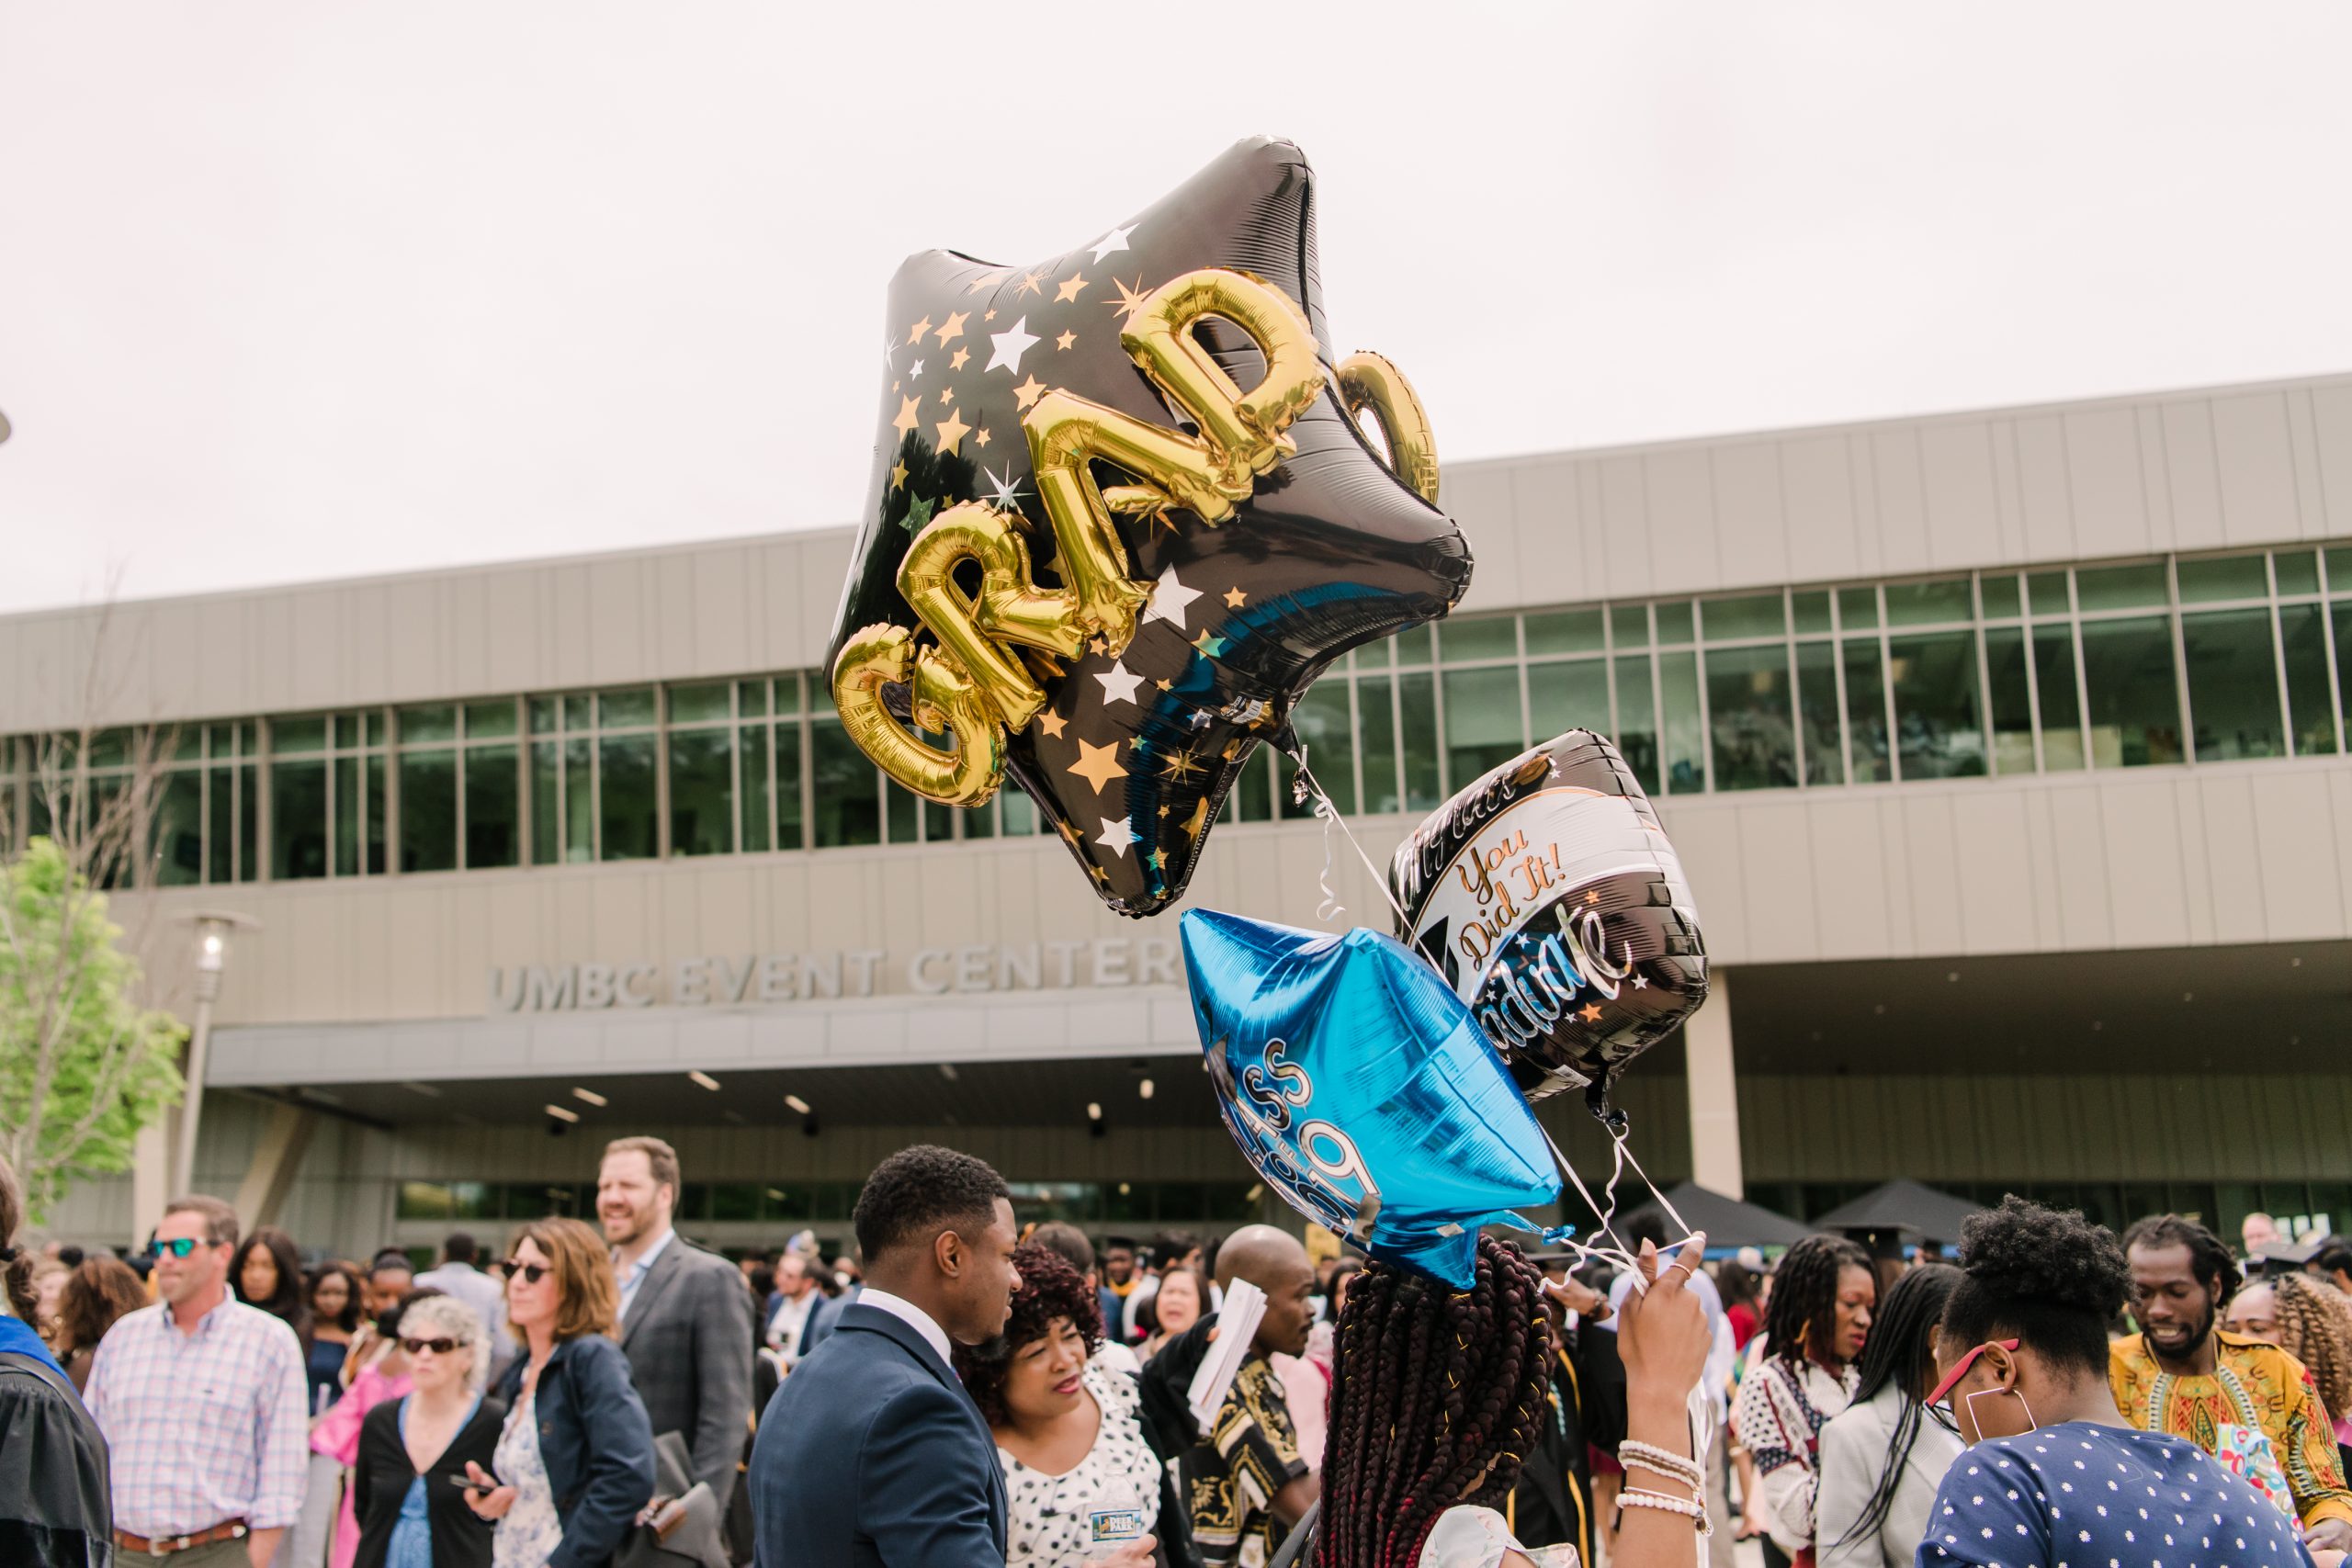 Star-shaped graduation balloons float in front of the UMBC event center. A crowd of people are outside waiting for graduation commencement to begin.